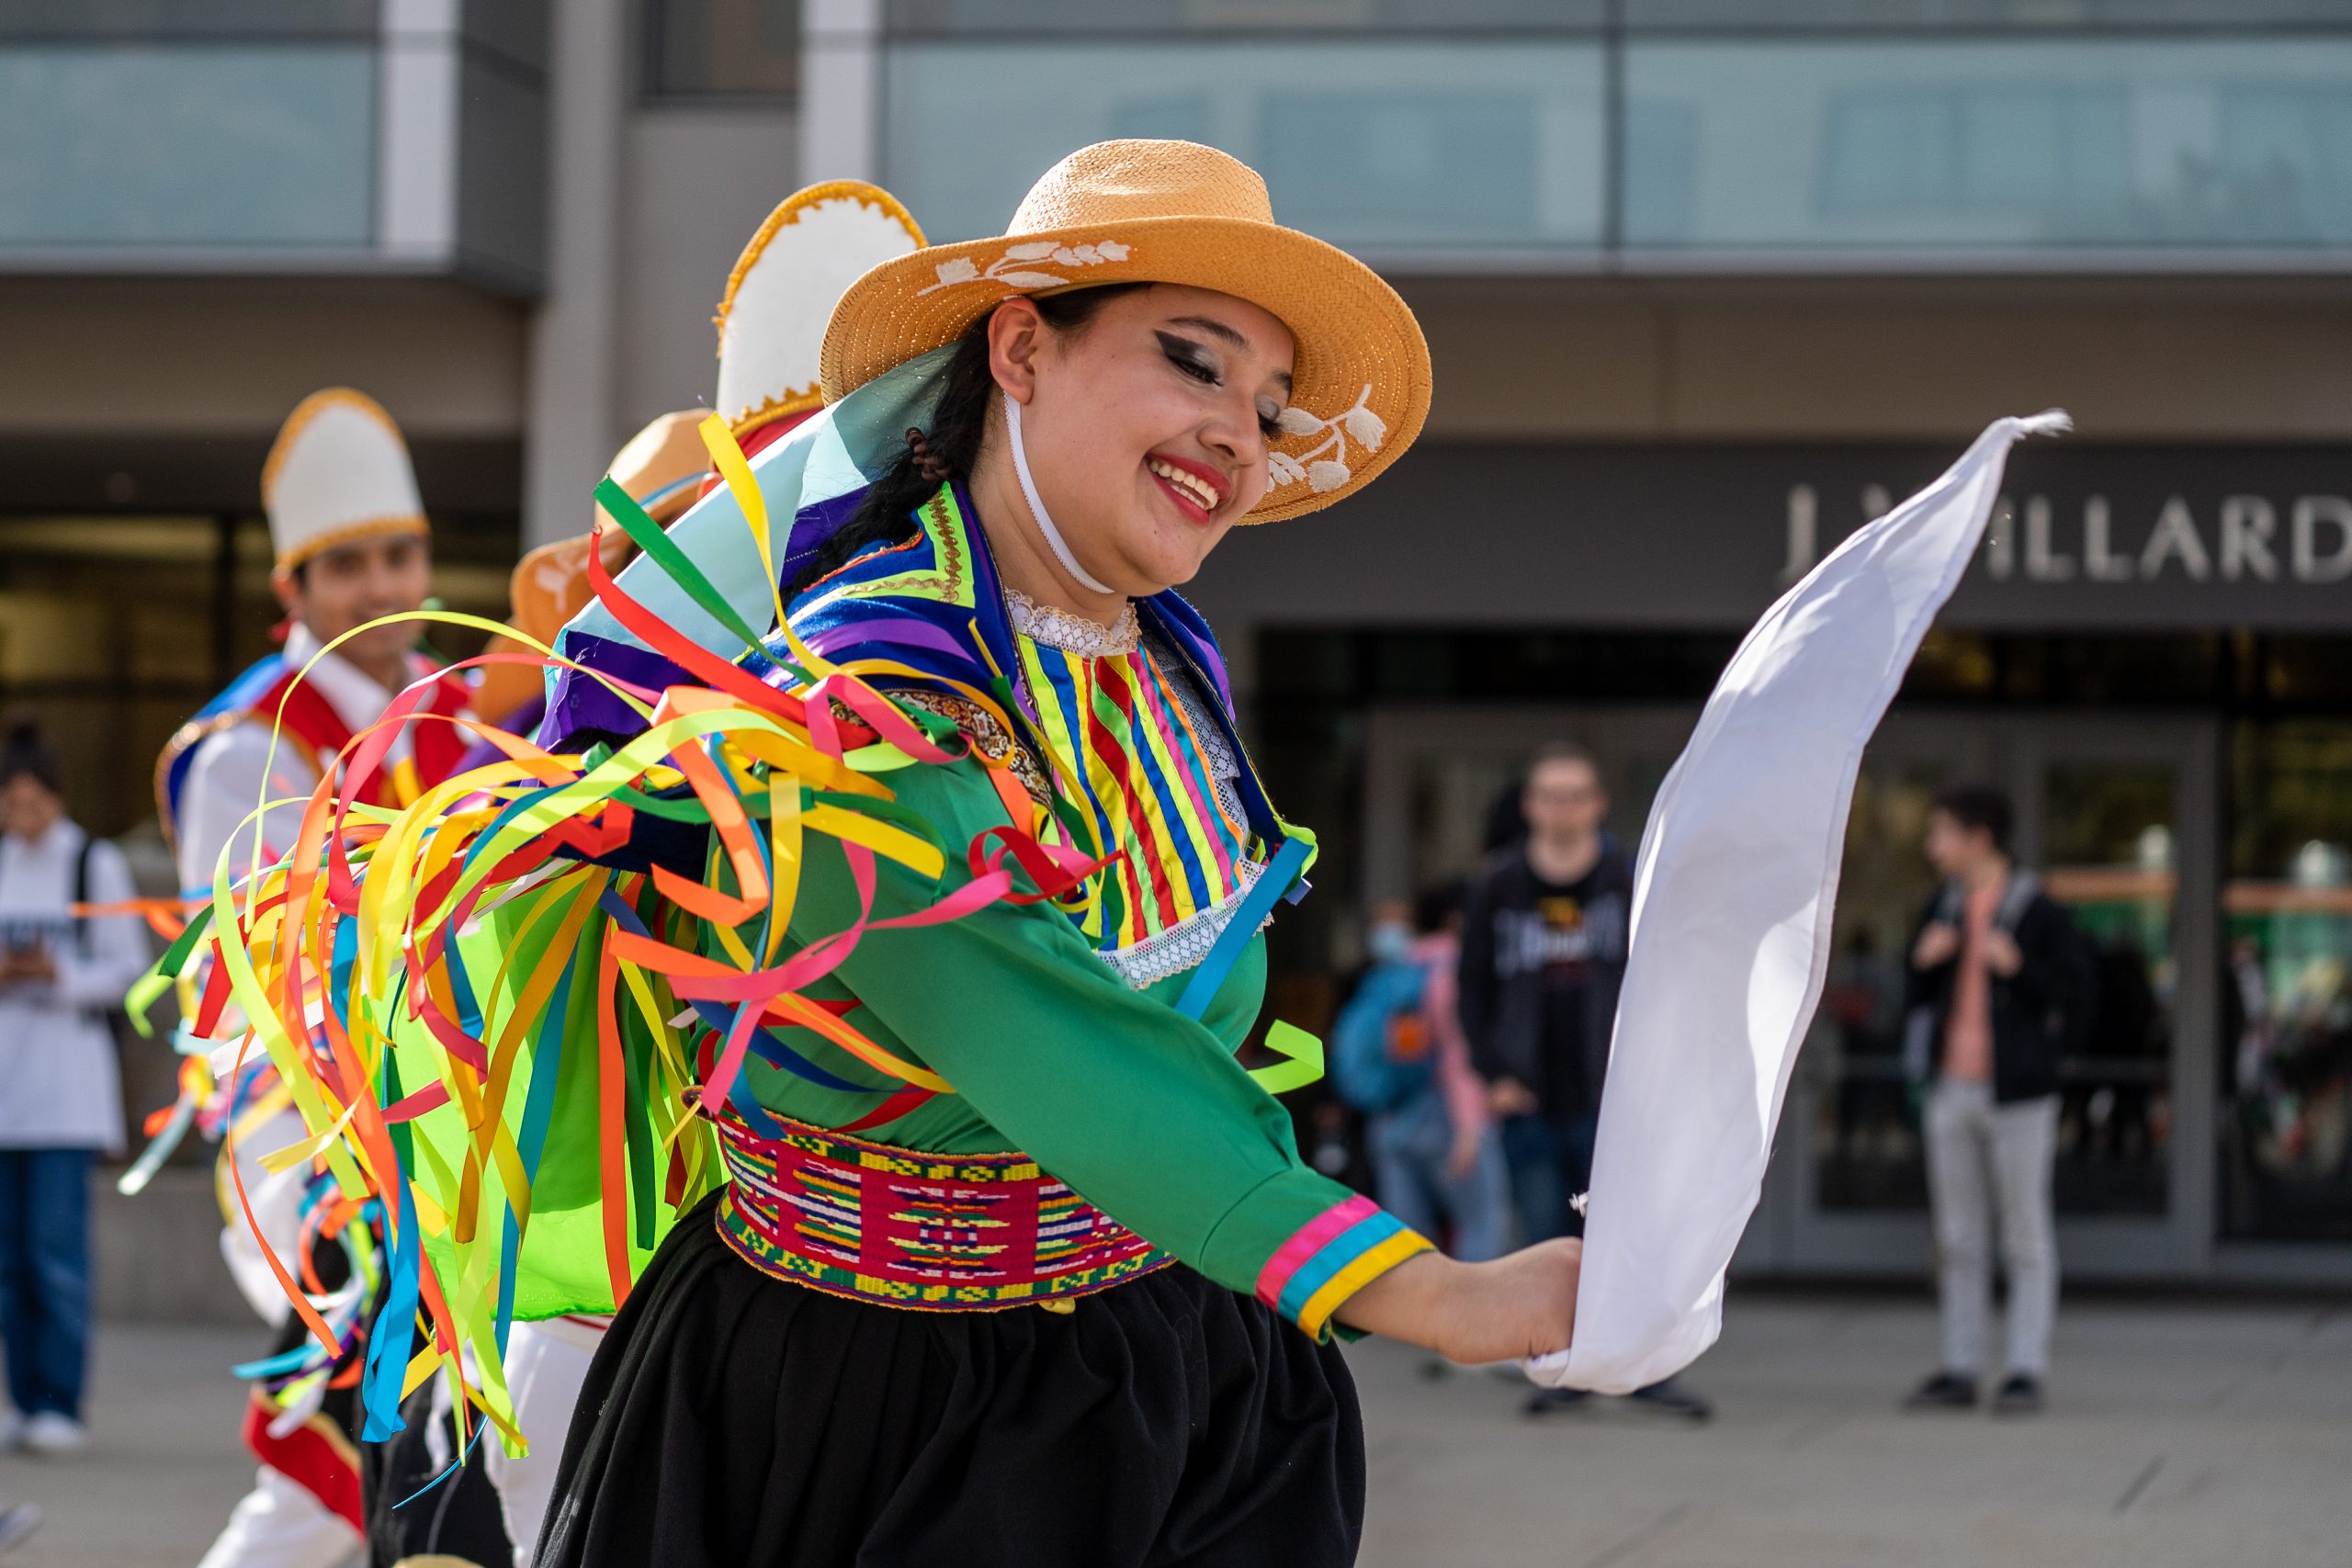 a student dances with a handkerchief while wearing traditional Peruvian clothing